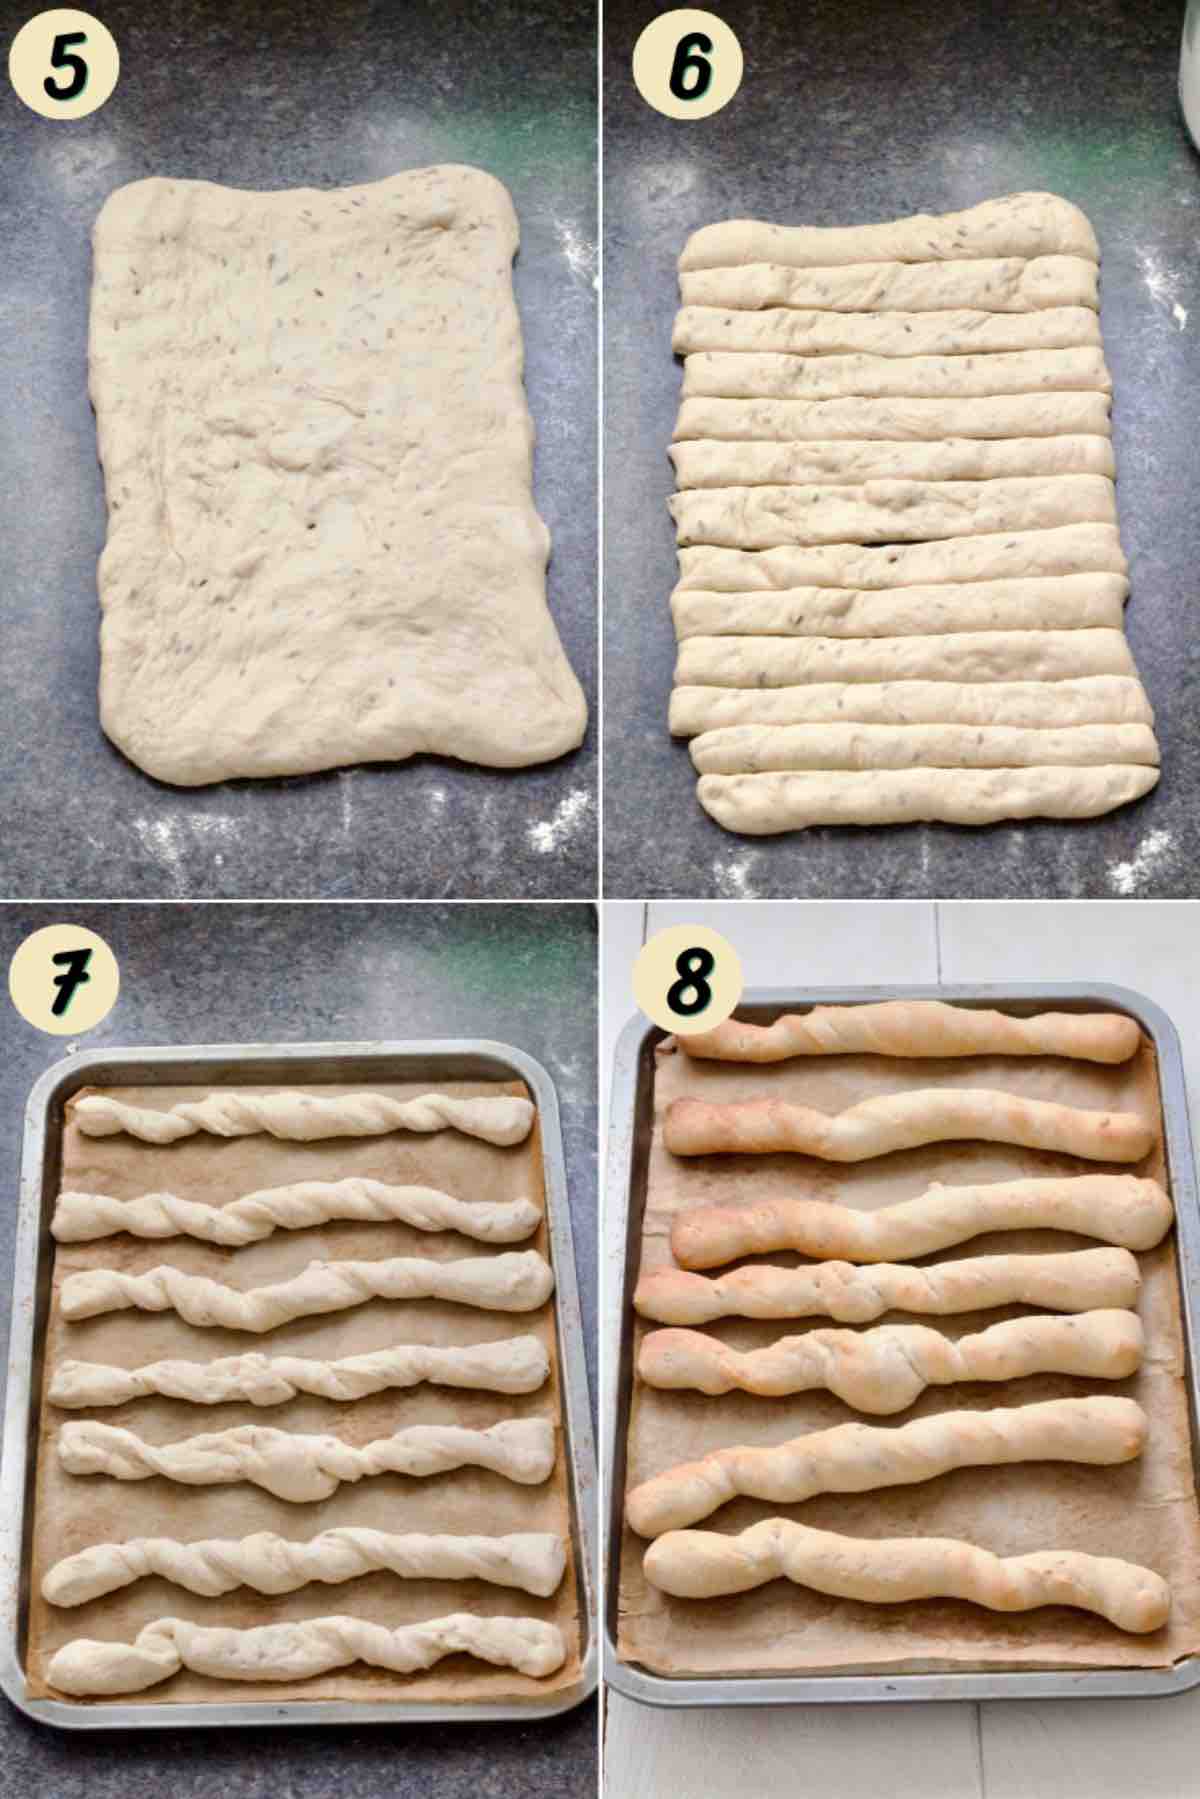 Breadsticks dough, cutting, shaping and baking.